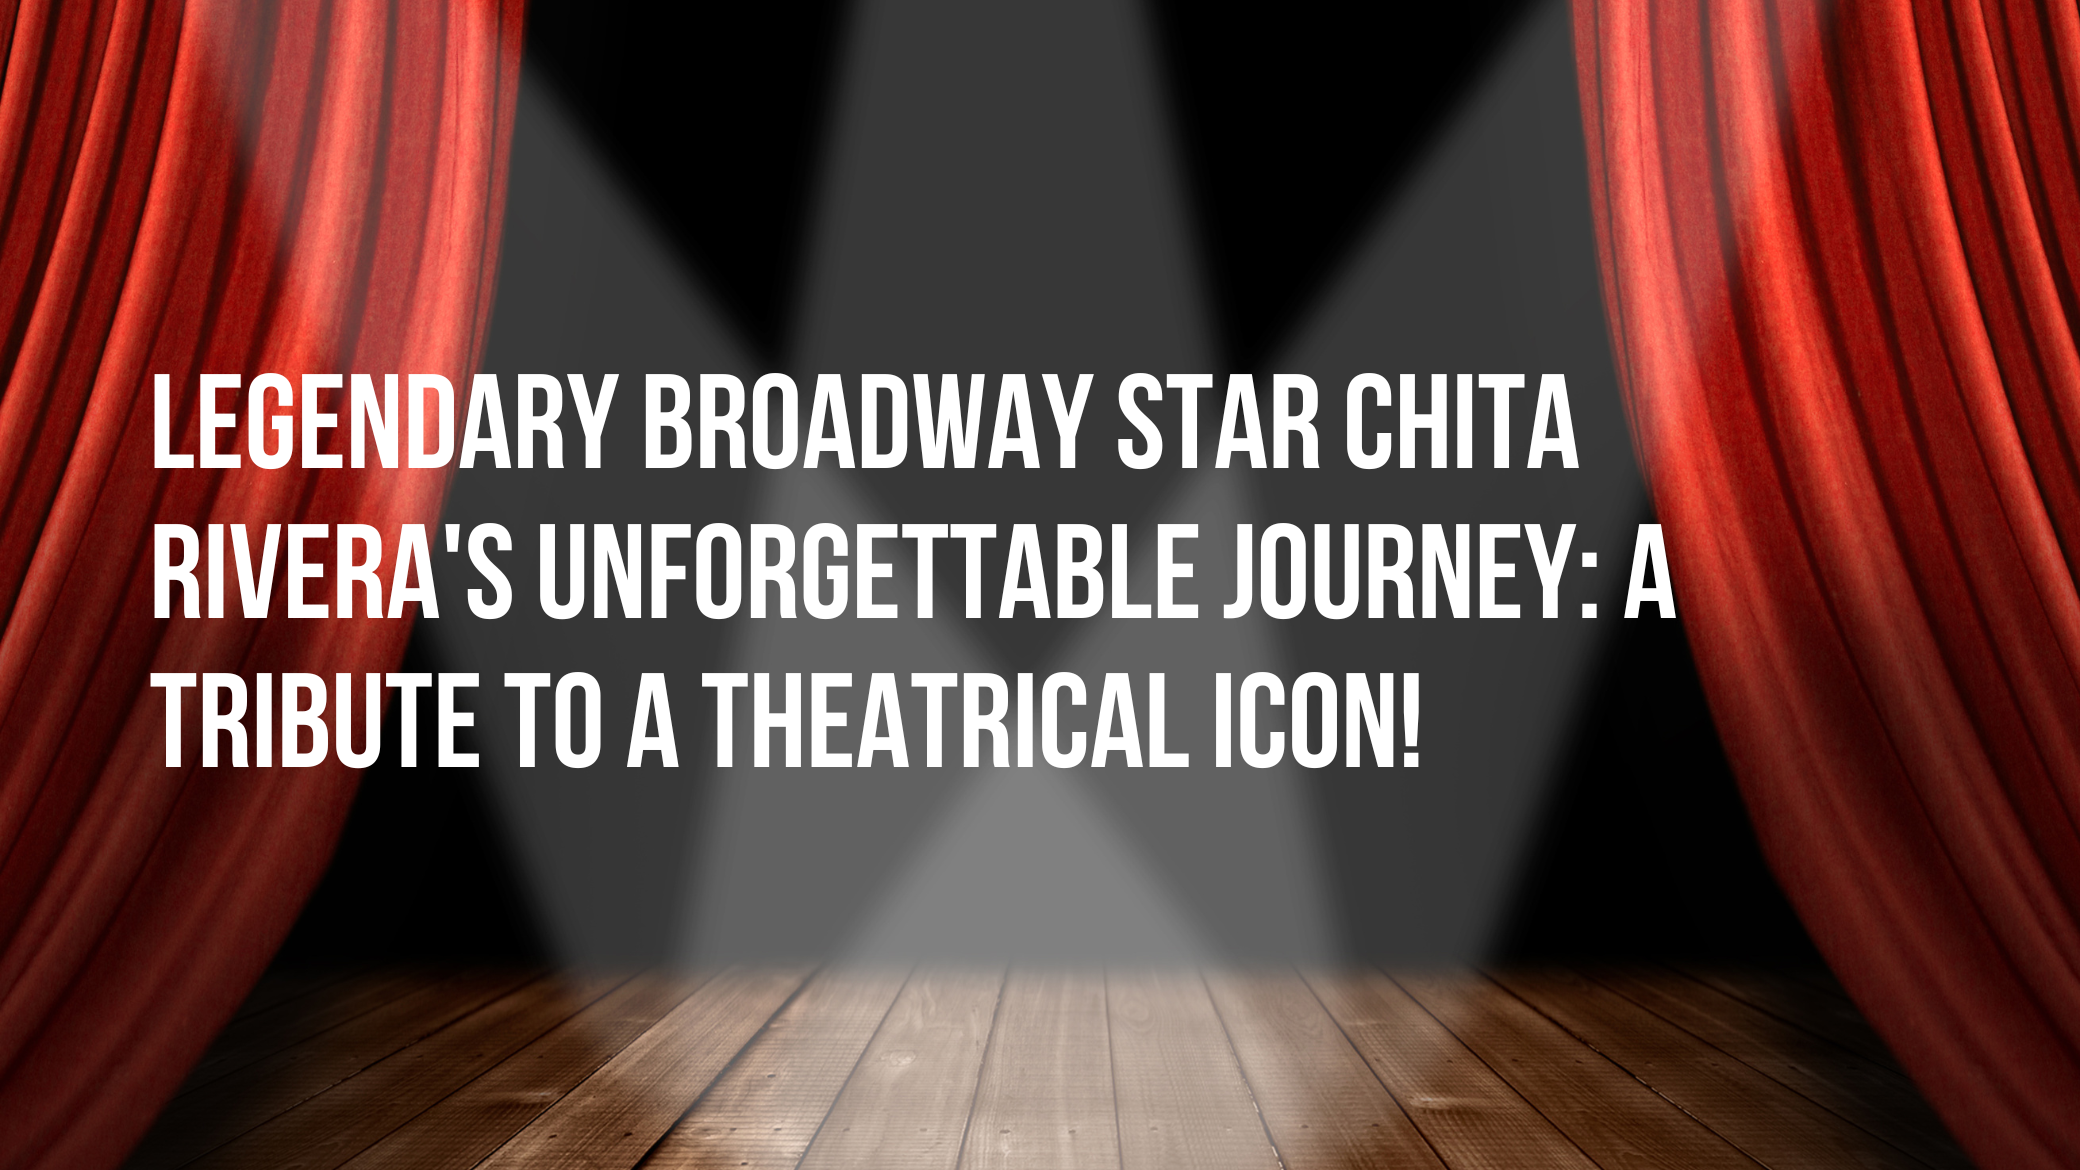 Legendary Broadway Star Chita Rivera's Unforgettable Journey: A Tribute to a Theatrical Icon!